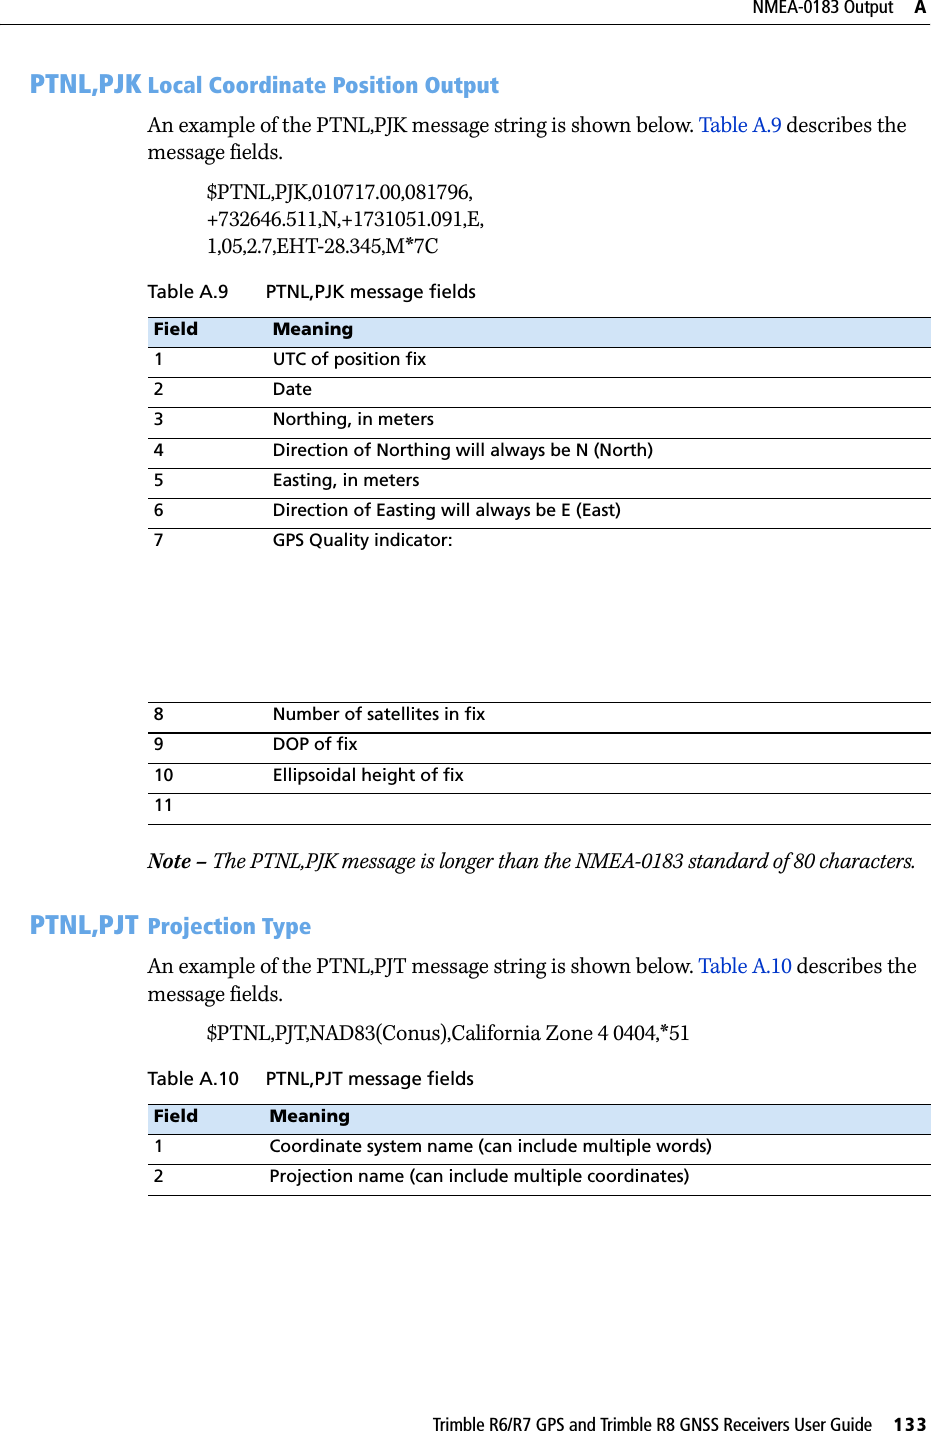 Trimble R6/R7 GPS and Trimble R8 GNSS Receivers User Guide     133NMEA-0183 Output     ATrimble R6 and R7 GPS/R8 GNSS Receiver Operation PTNL,PJK Local Coordinate Position OutputAn example of the PTNL,PJK message string is shown below. Table A.9 describes the message fields.$PTNL,PJK,010717.00,081796,+732646.511,N,+1731051.091,E,1,05,2.7,EHT-28.345,M*7CNote – The PTNL,PJK message is longer than the NMEA-0183 standard of 80 characters.PTNL,PJT Projection TypeAn example of the PTNL,PJT message string is shown below. Table A.10 describes the message fields.$PTNL,PJT,NAD83(Conus),California Zone 4 0404,*51Table A.9 PTNL,PJK message fieldsField Meaning1 UTC of position fix2Date3 Northing, in meters4 Direction of Northing will always be N (North)5 Easting, in meters6 Direction of Easting will always be E (East)7 GPS Quality indicator:8 Number of satellites in fix9DOP of fix10 Ellipsoidal height of fix11Table A.10 PTNL,PJT message fieldsField Meaning1 Coordinate system name (can include multiple words)2 Projection name (can include multiple coordinates)